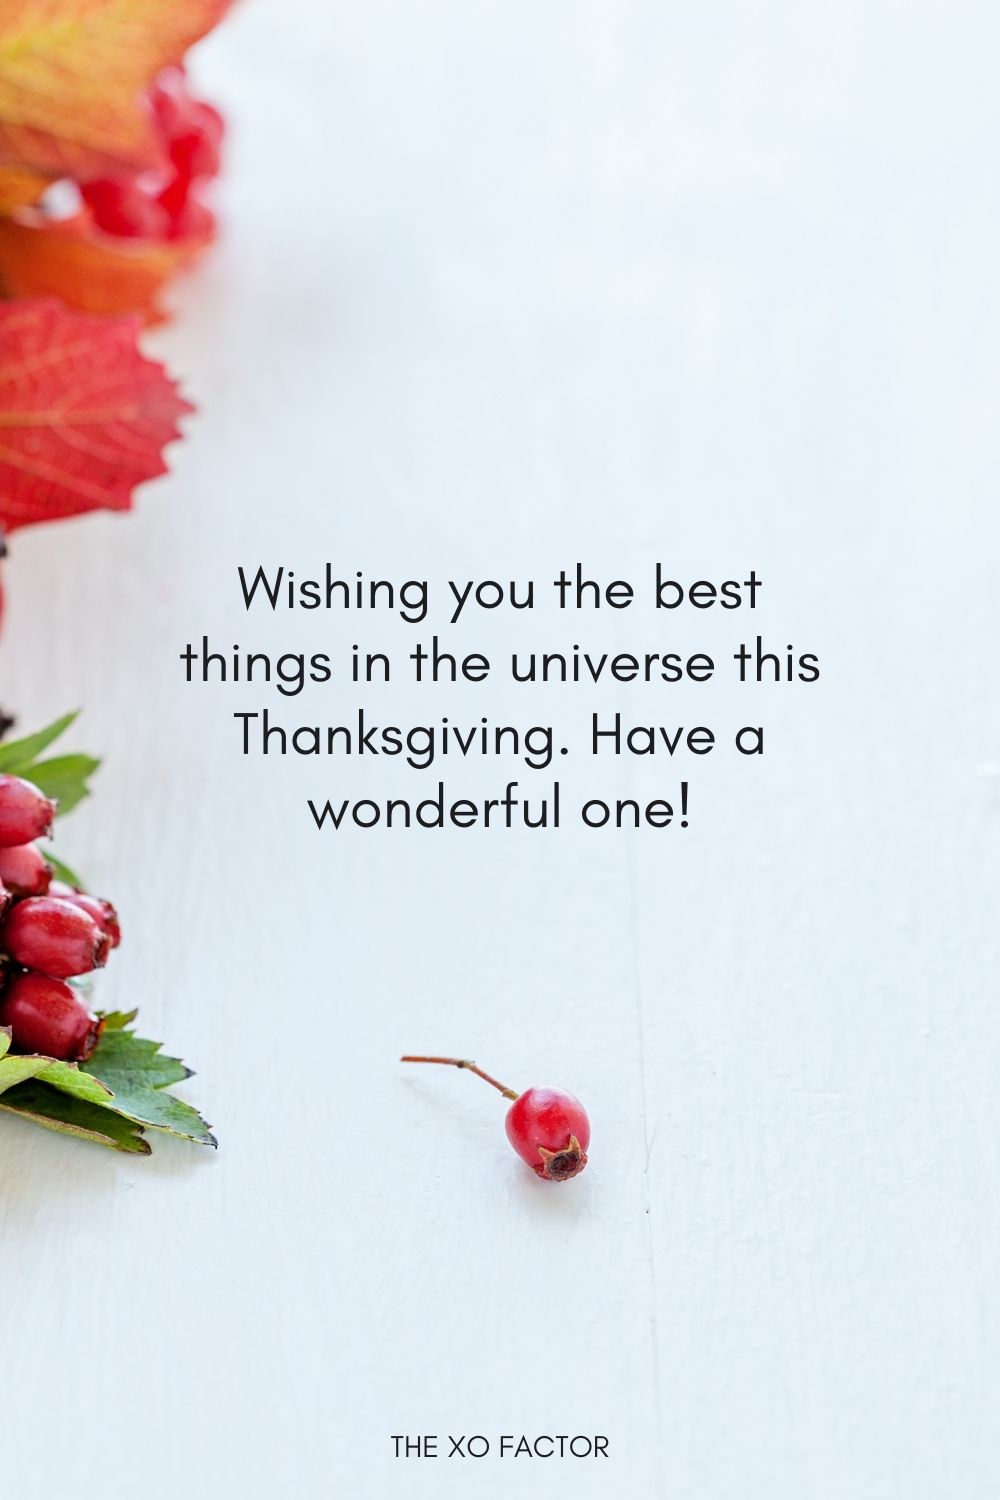 Wishing you the best things in the universe this Thanksgiving. Have a wonderful one!